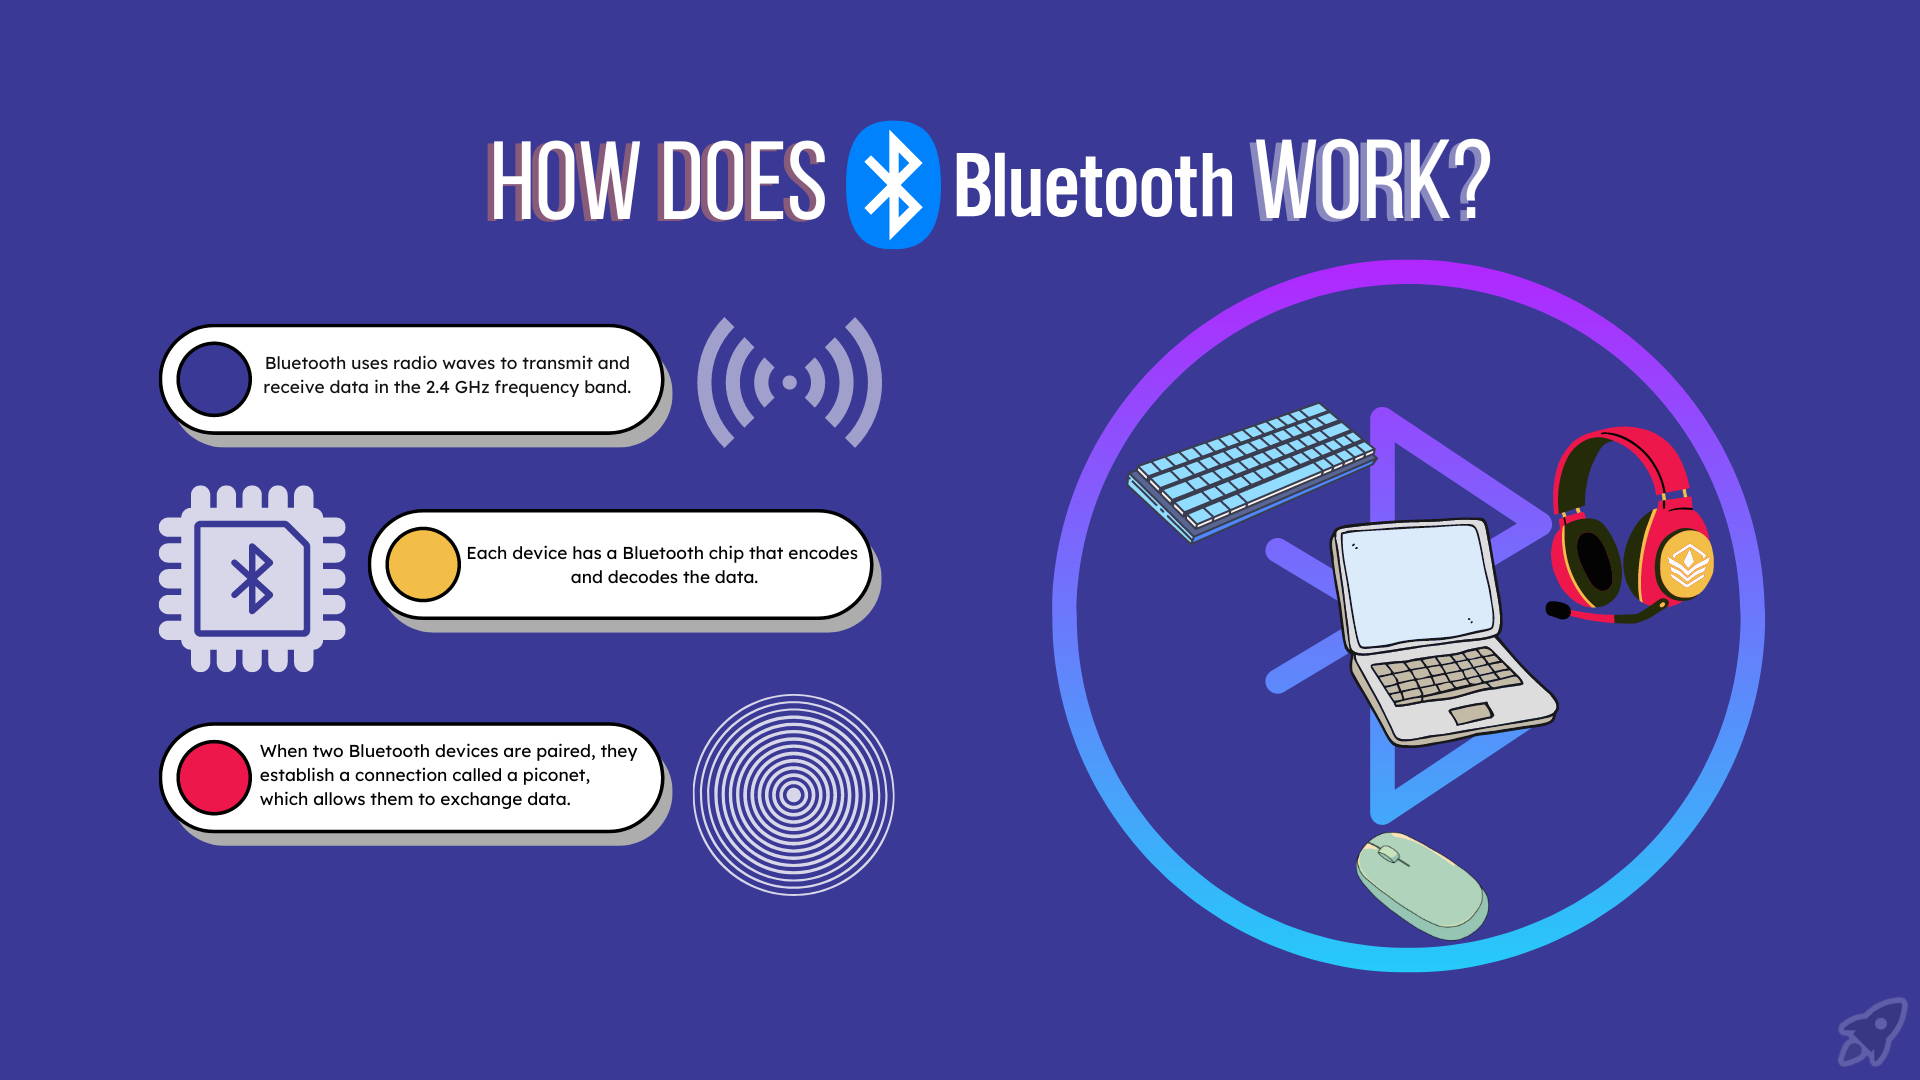 How does Bluetooth work?